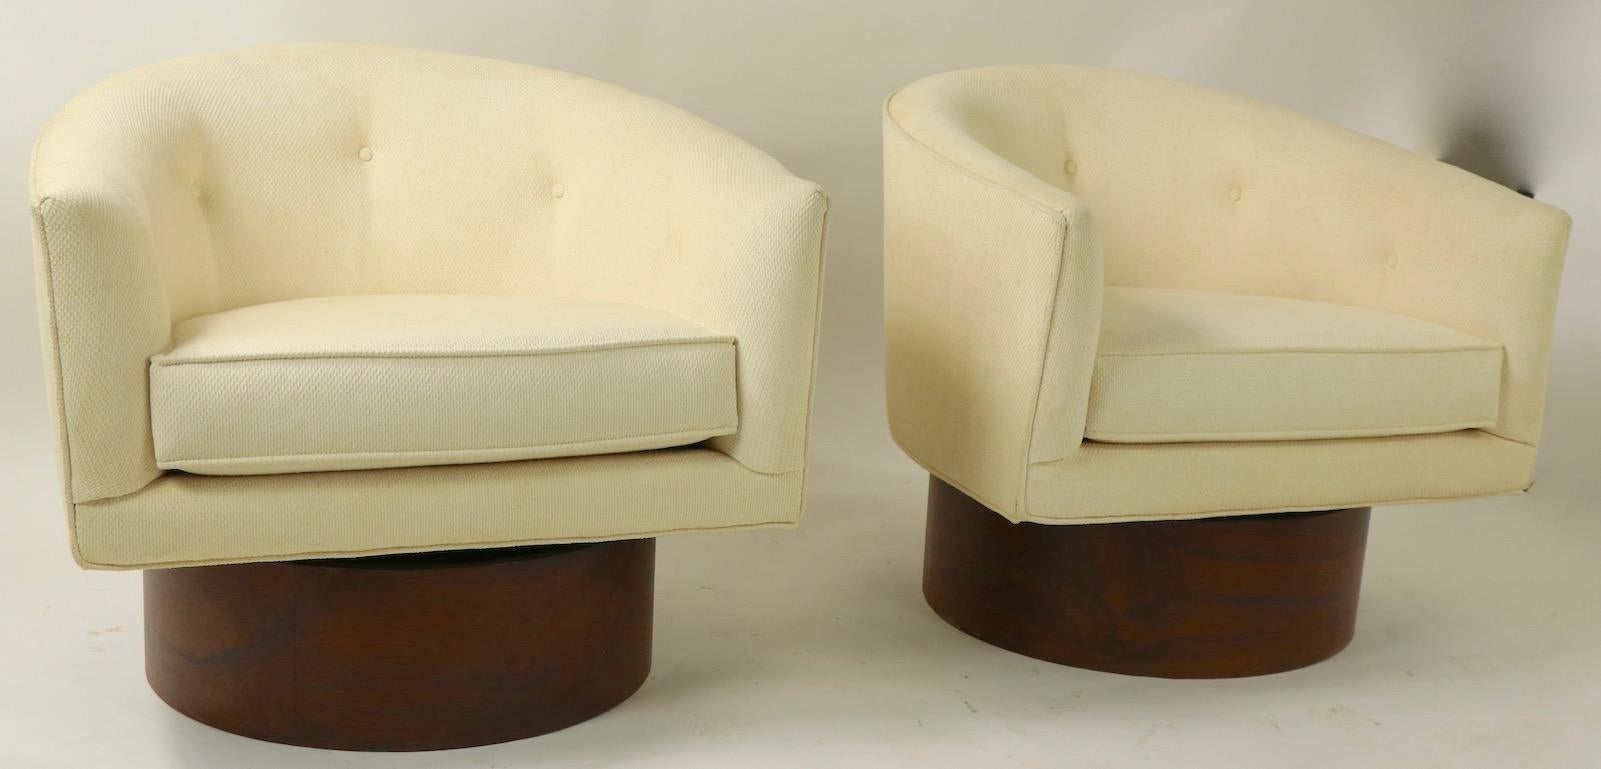 Upholstery Pair of Swivel Chairs by Baughman for Thayer Coggin